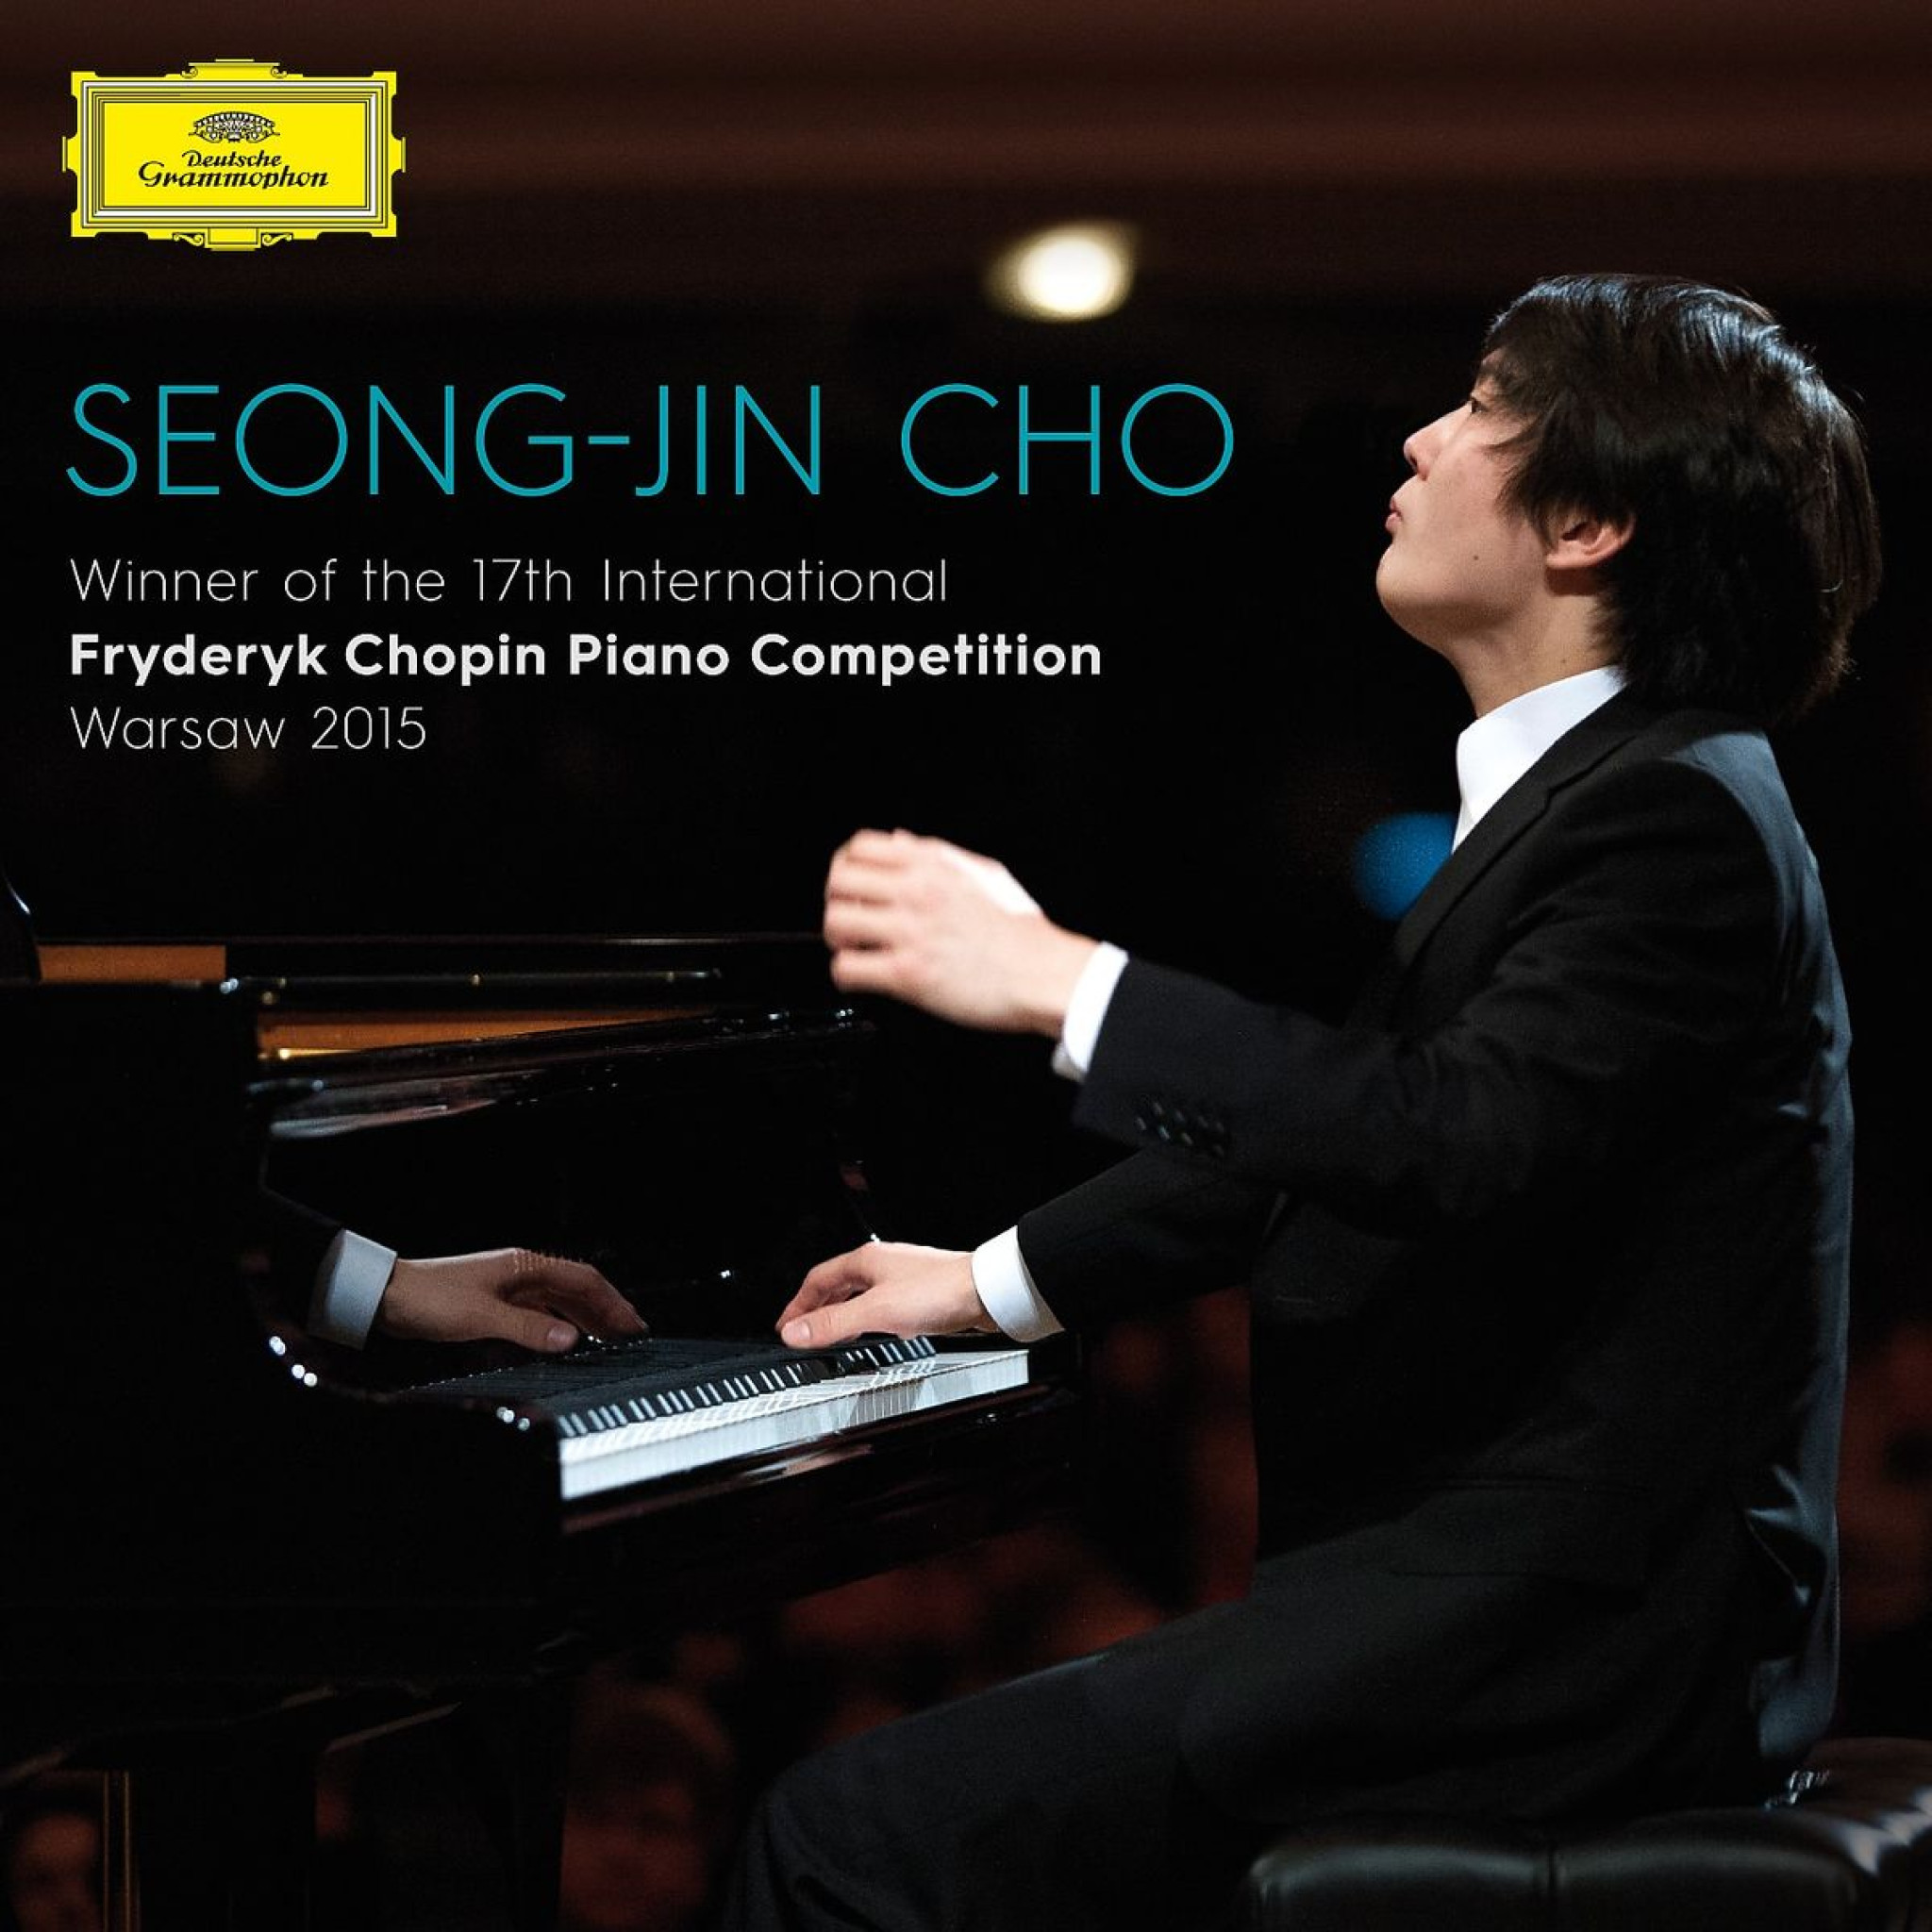 Winner of the 17th Int. Chopin Piano Competition